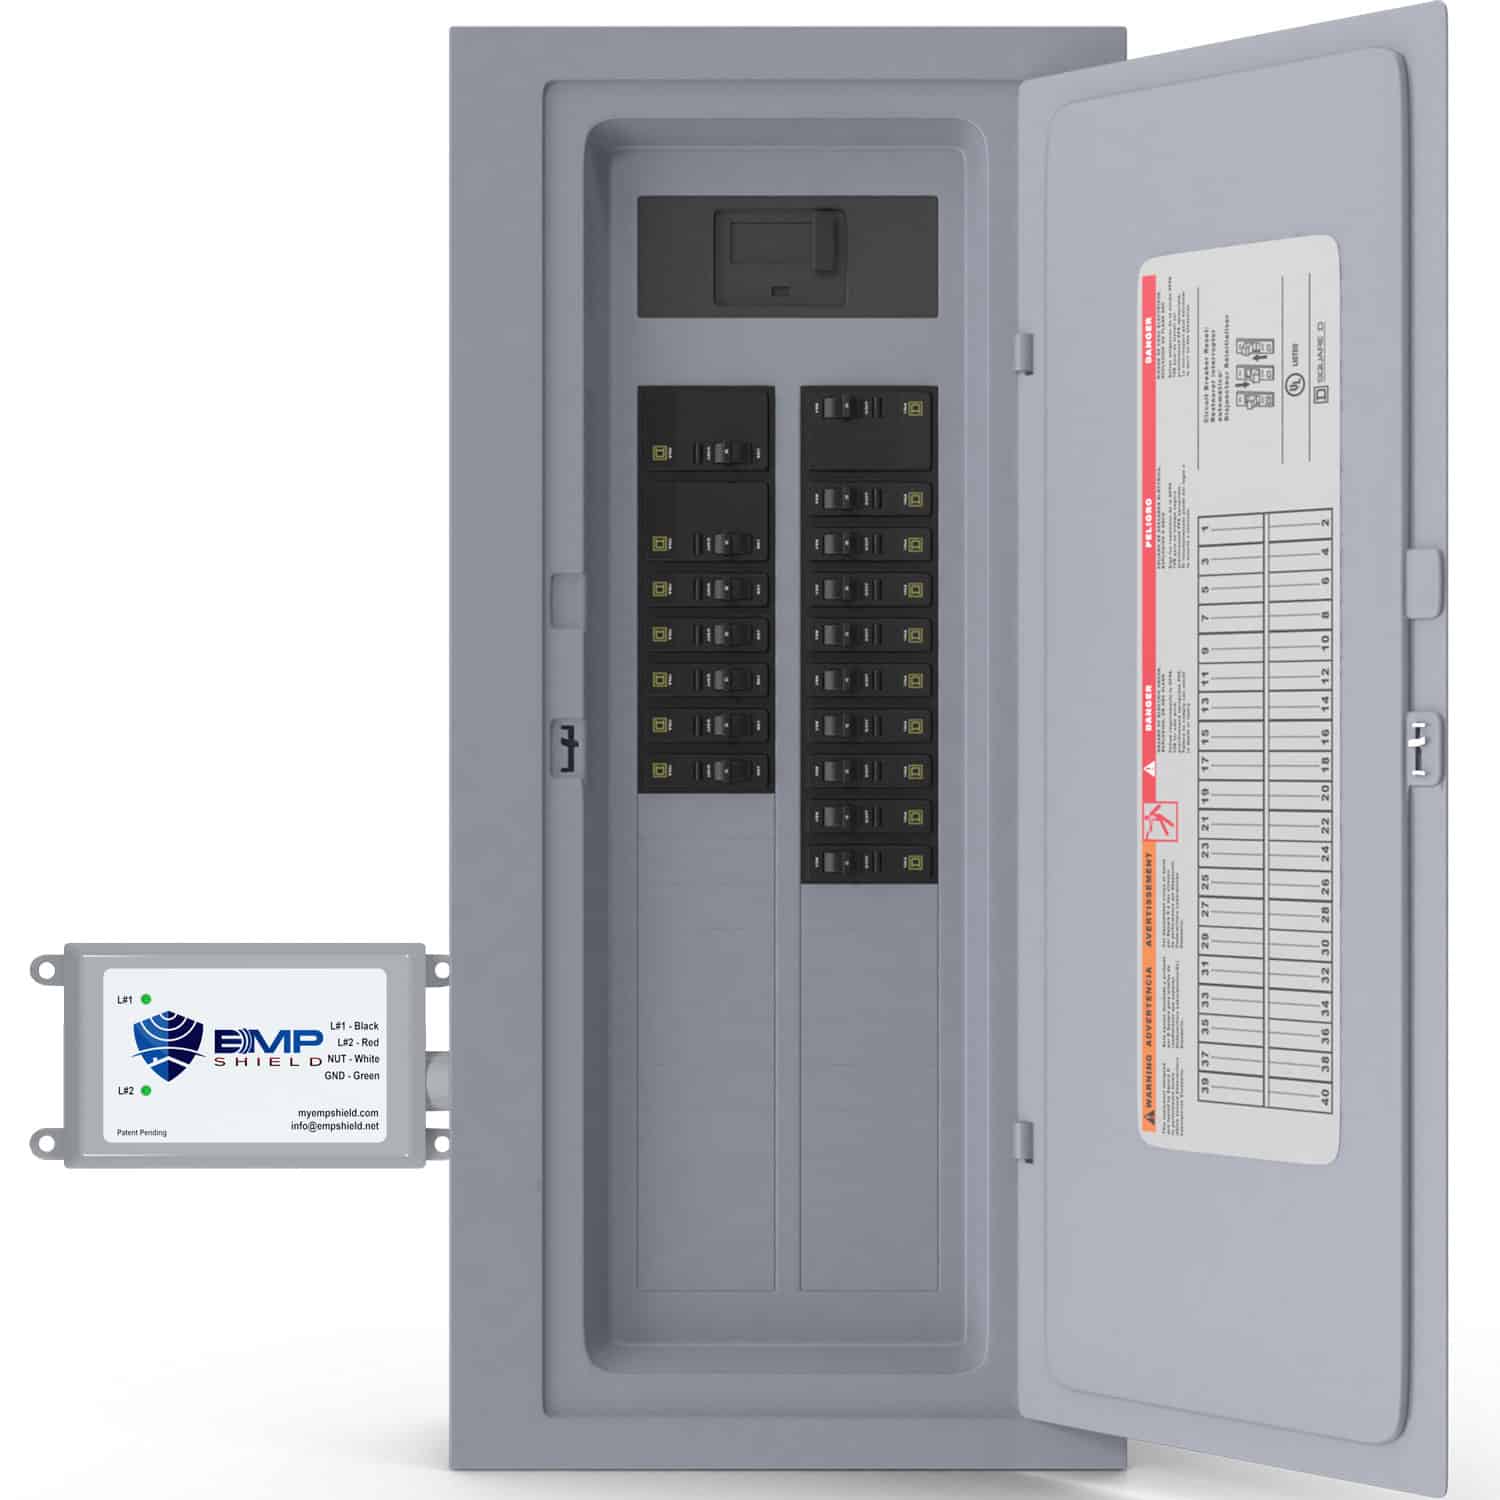 An *EMP Shield Whole Home EMP, Solar Flare & Lightning Protection (SP-120-240-W) panel with a remote control.